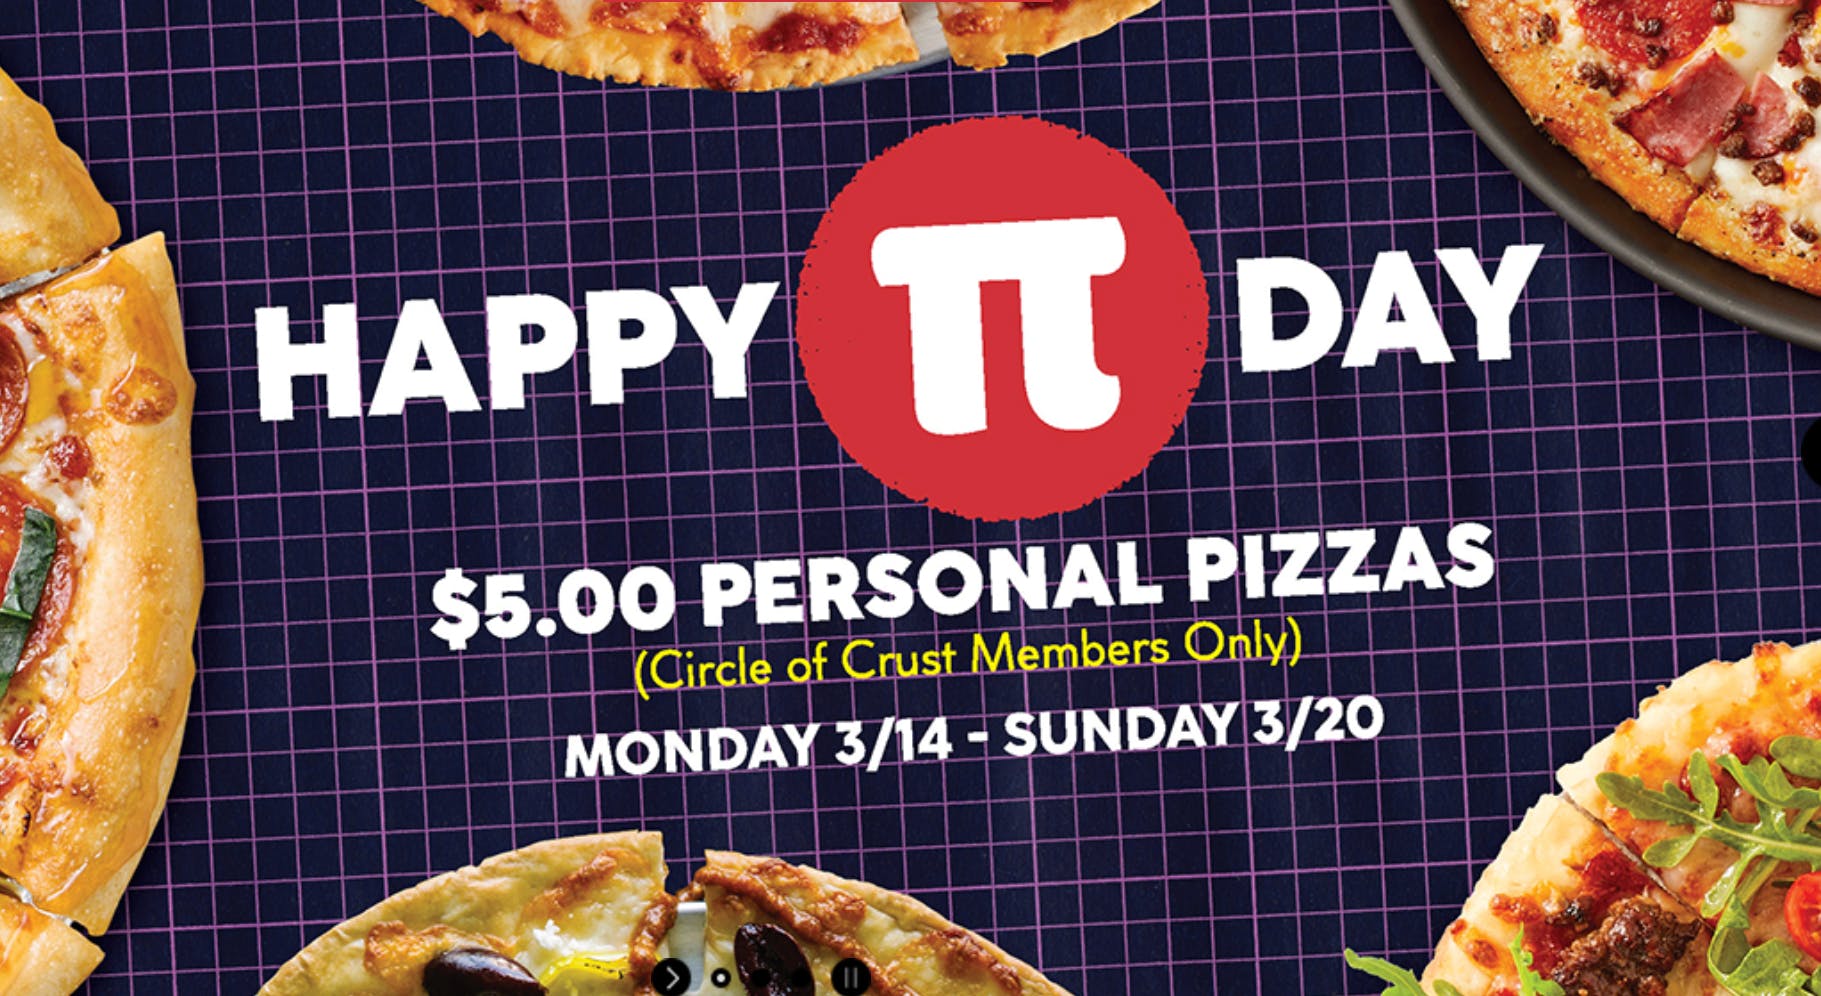 19 Pi Day Deals That'll Get You Cheap Pizza & Pies The Krazy Coupon Lady